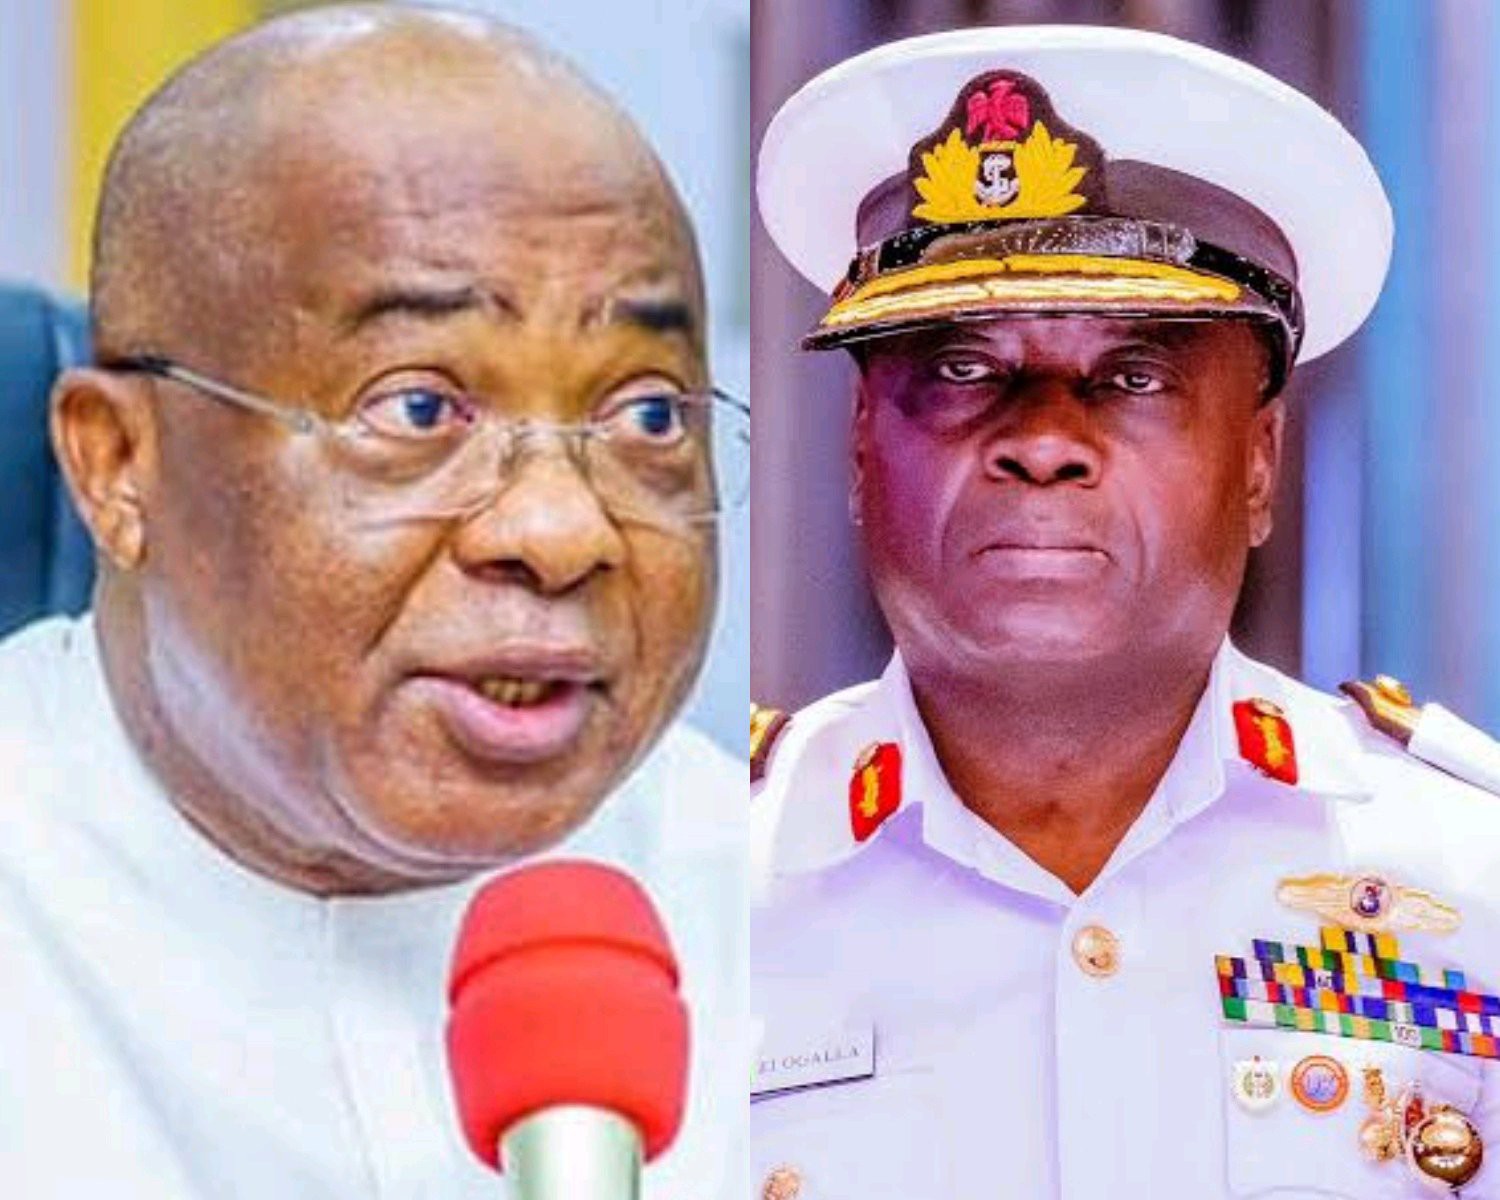 Uzodinma 'For first time in 10yrs we are having a service chief from S/E, the Chief of Naval Staff'